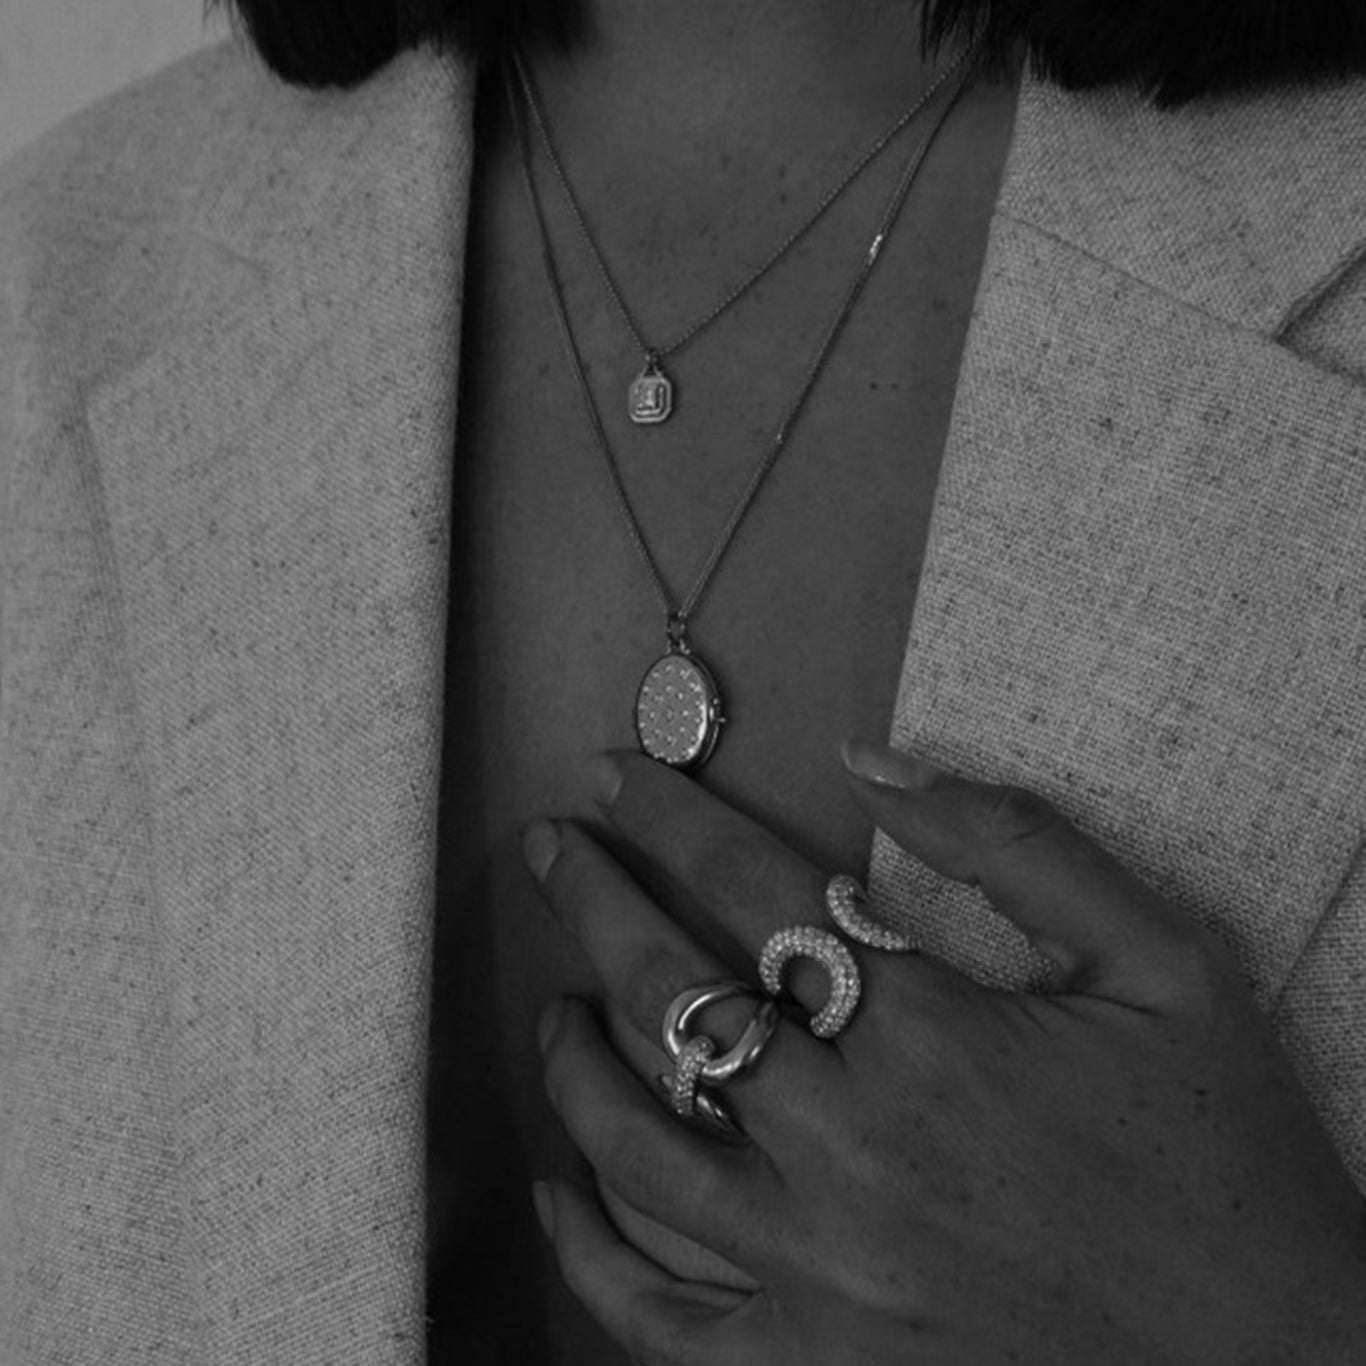 Comet Necklace shown with the Etoile Locket, Medusa Ring, and Love Lock Ring